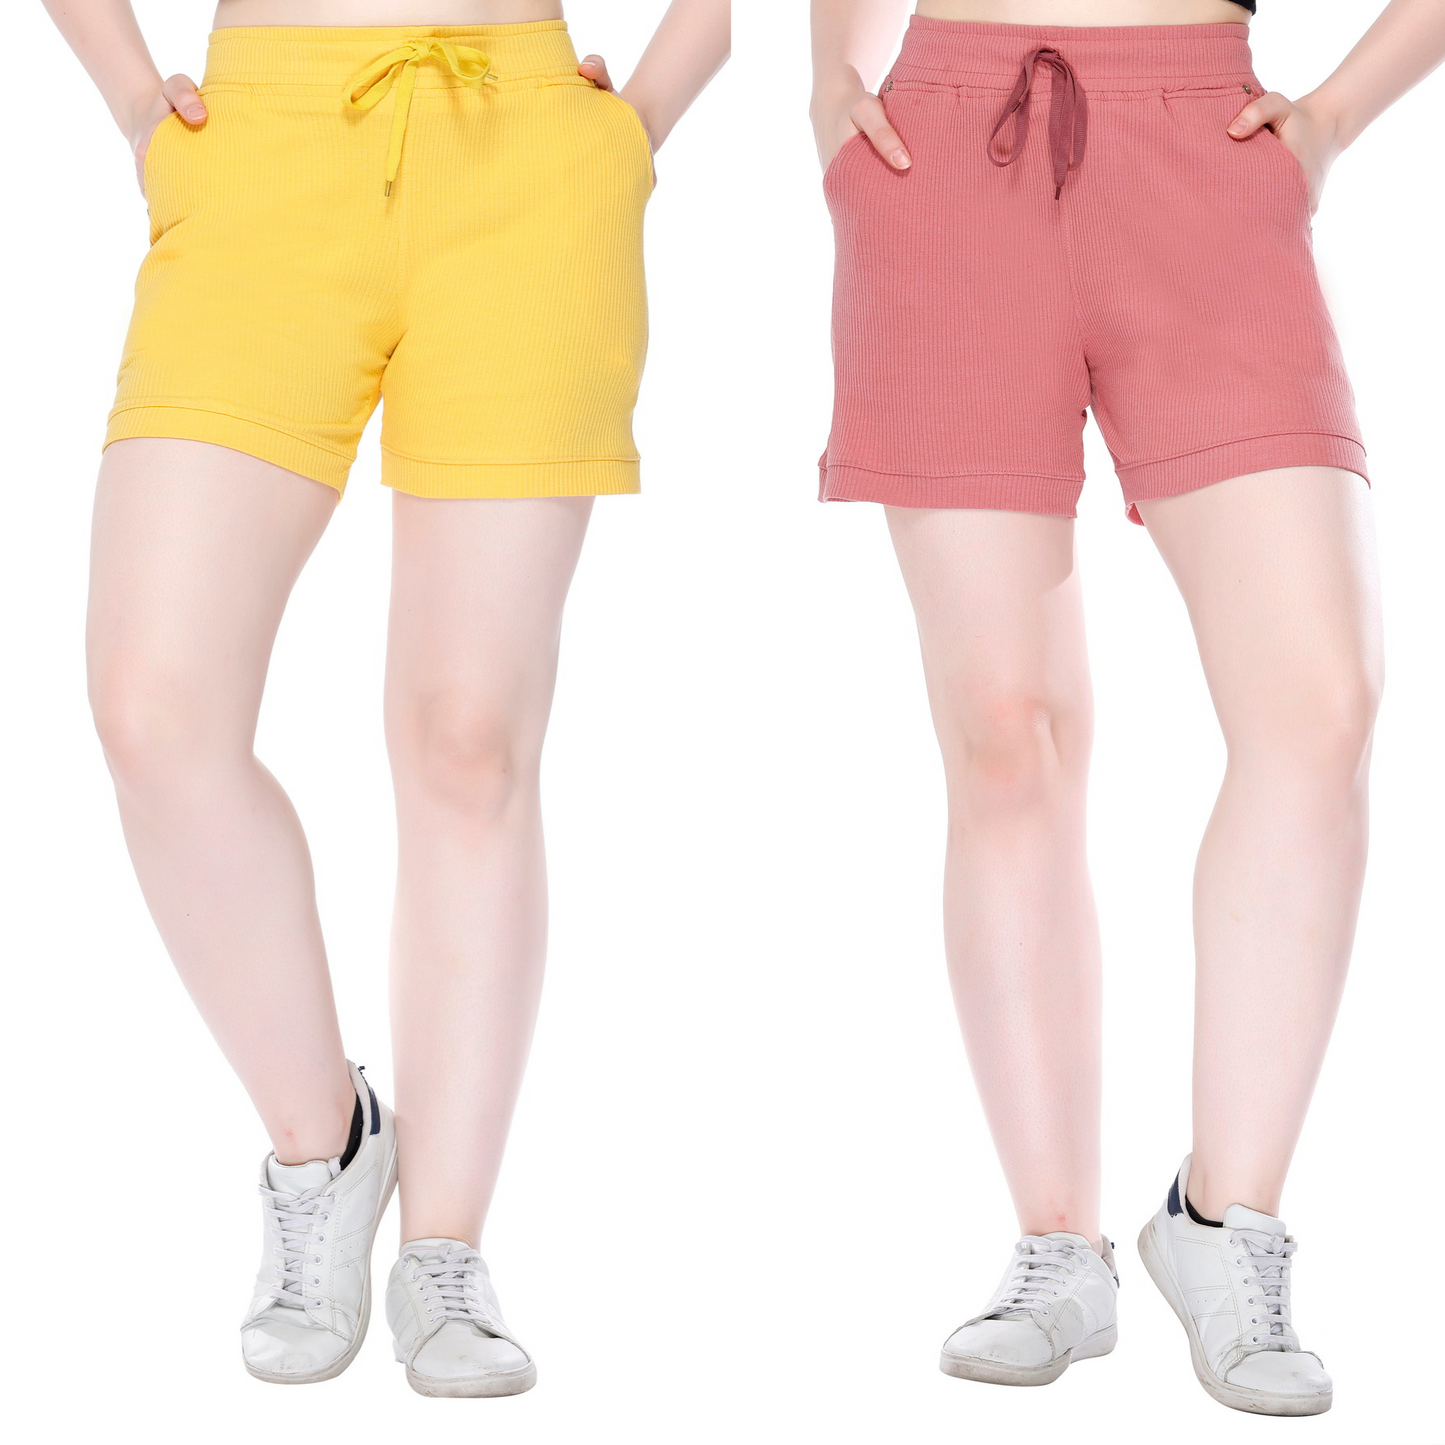 Comfortable Cotton Shorts For Women Combo (Rosy Pink/Mango) Online In India